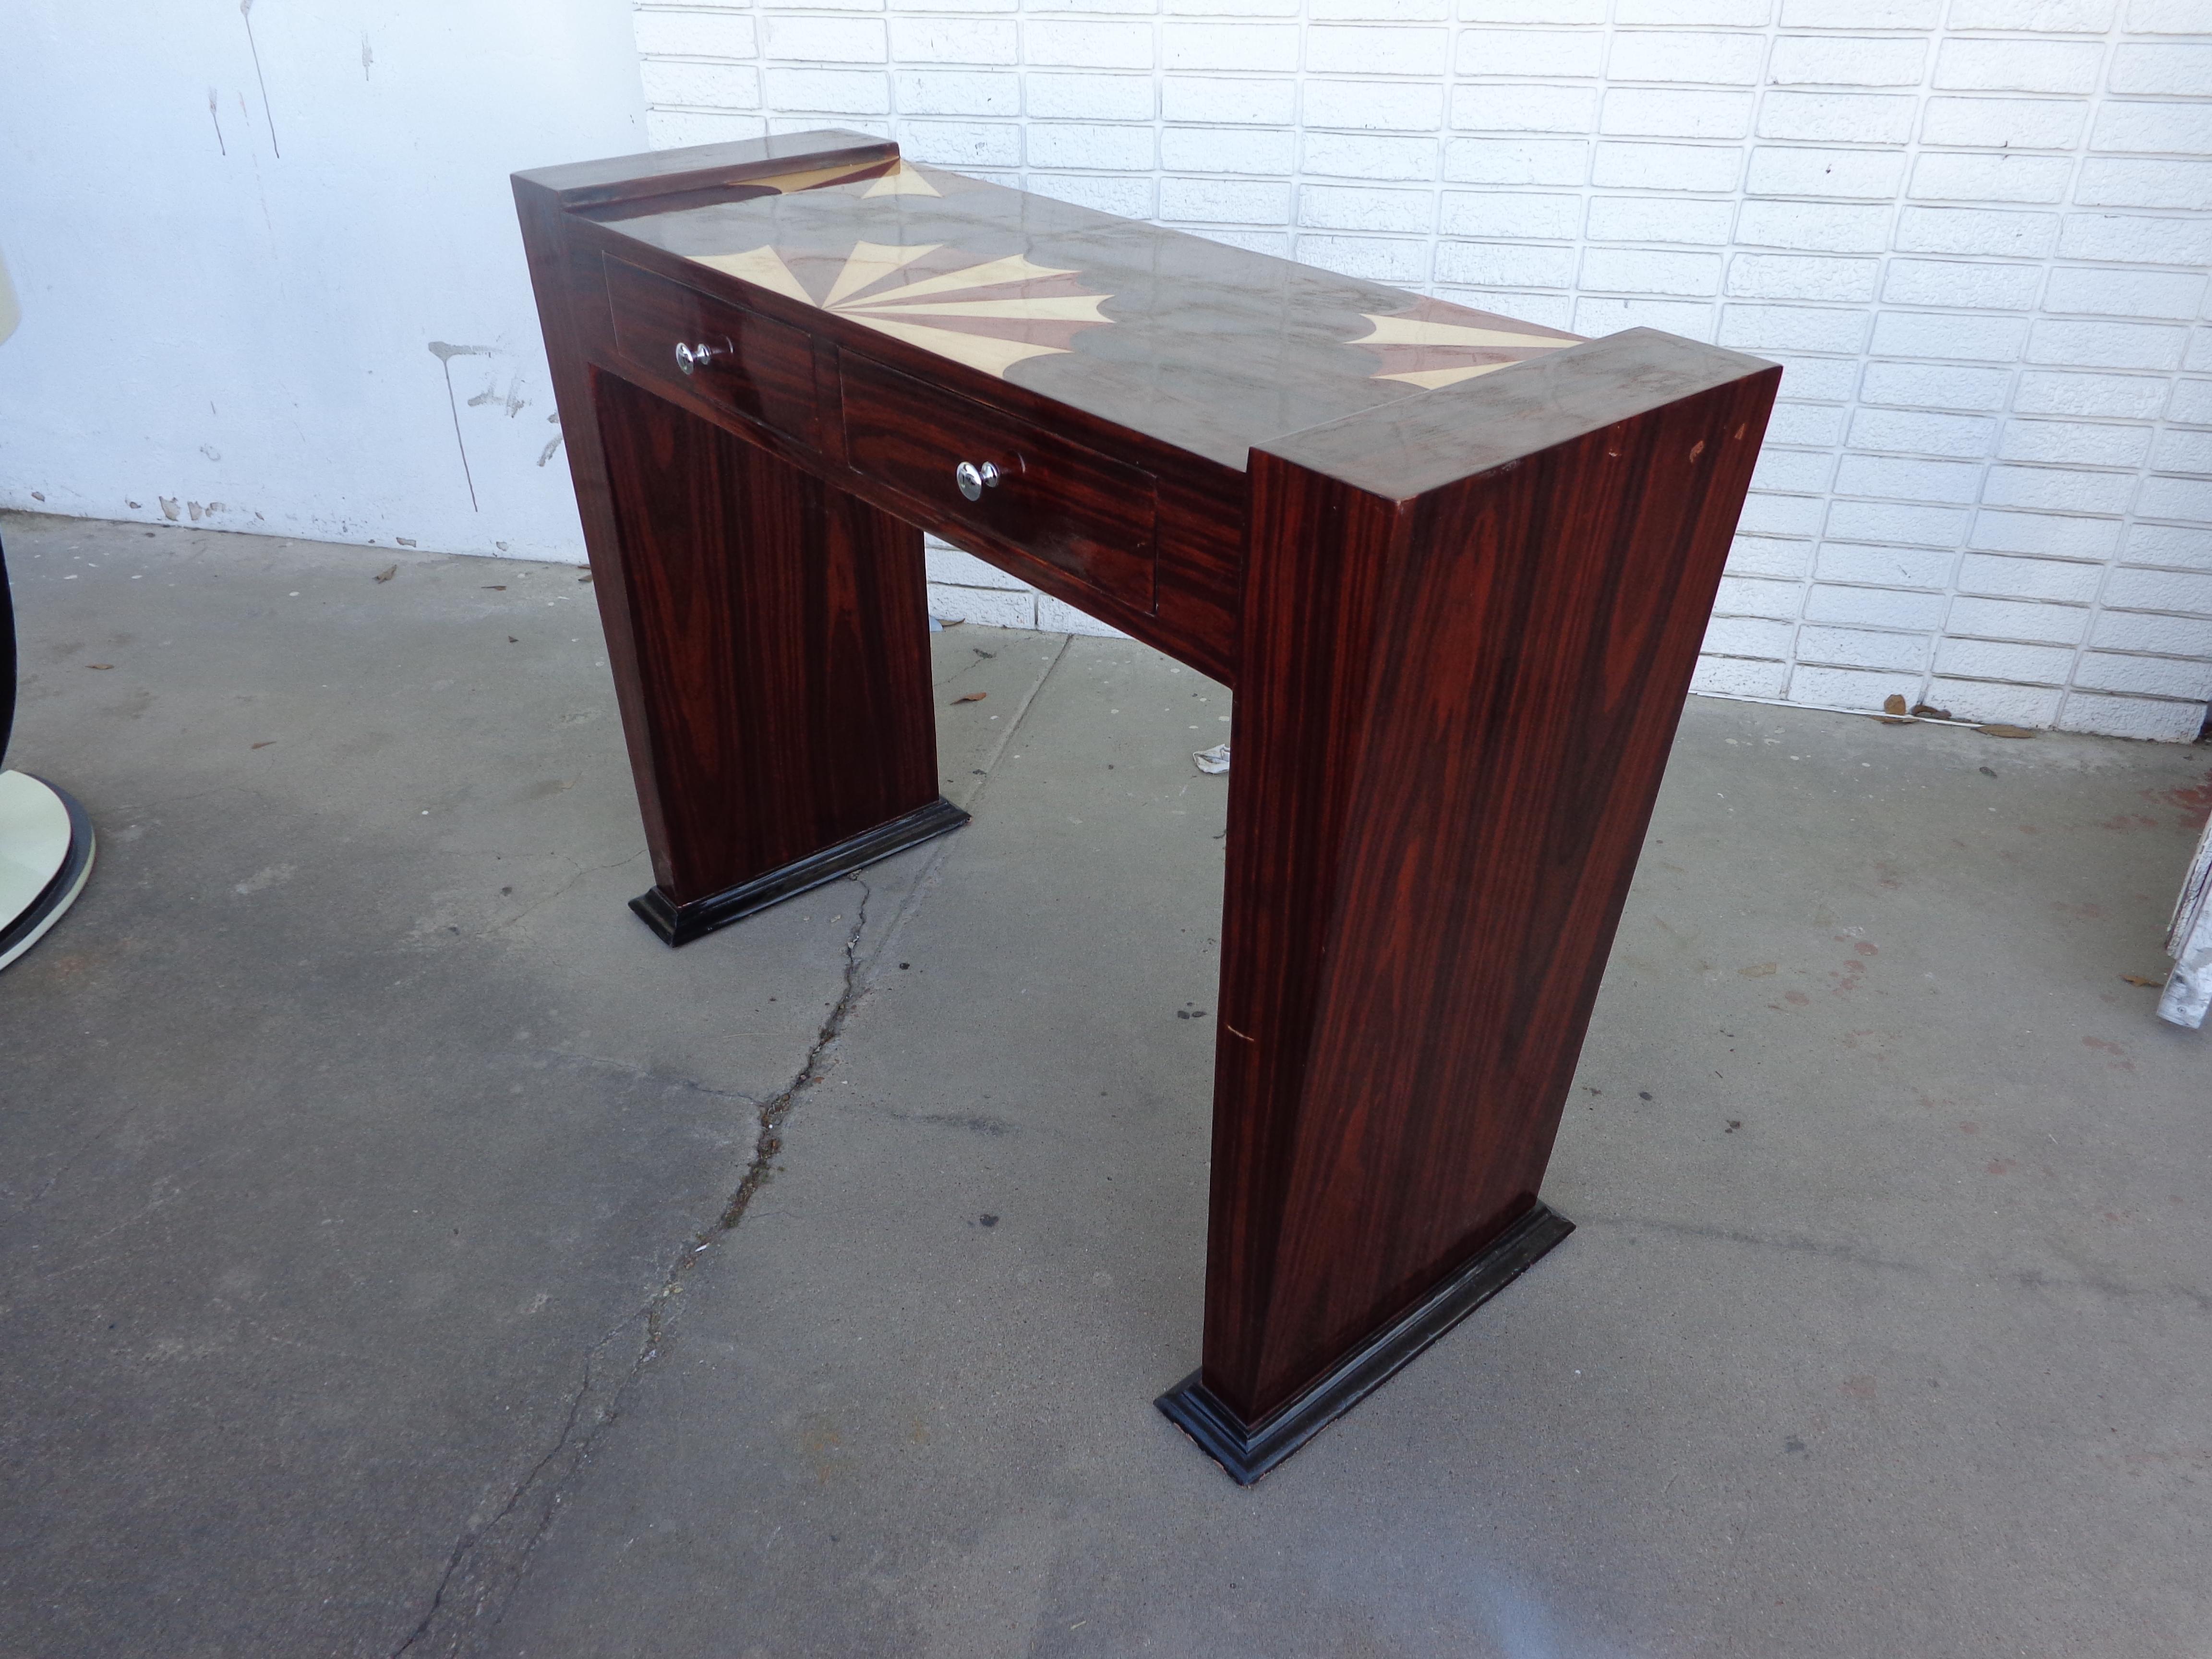 Art Deco console

Art Deco style rosewood console

Exotic wood geometric parquetry design on the top. Ebonized base.
Two drawers with nickel pulls. 

Measures: 47